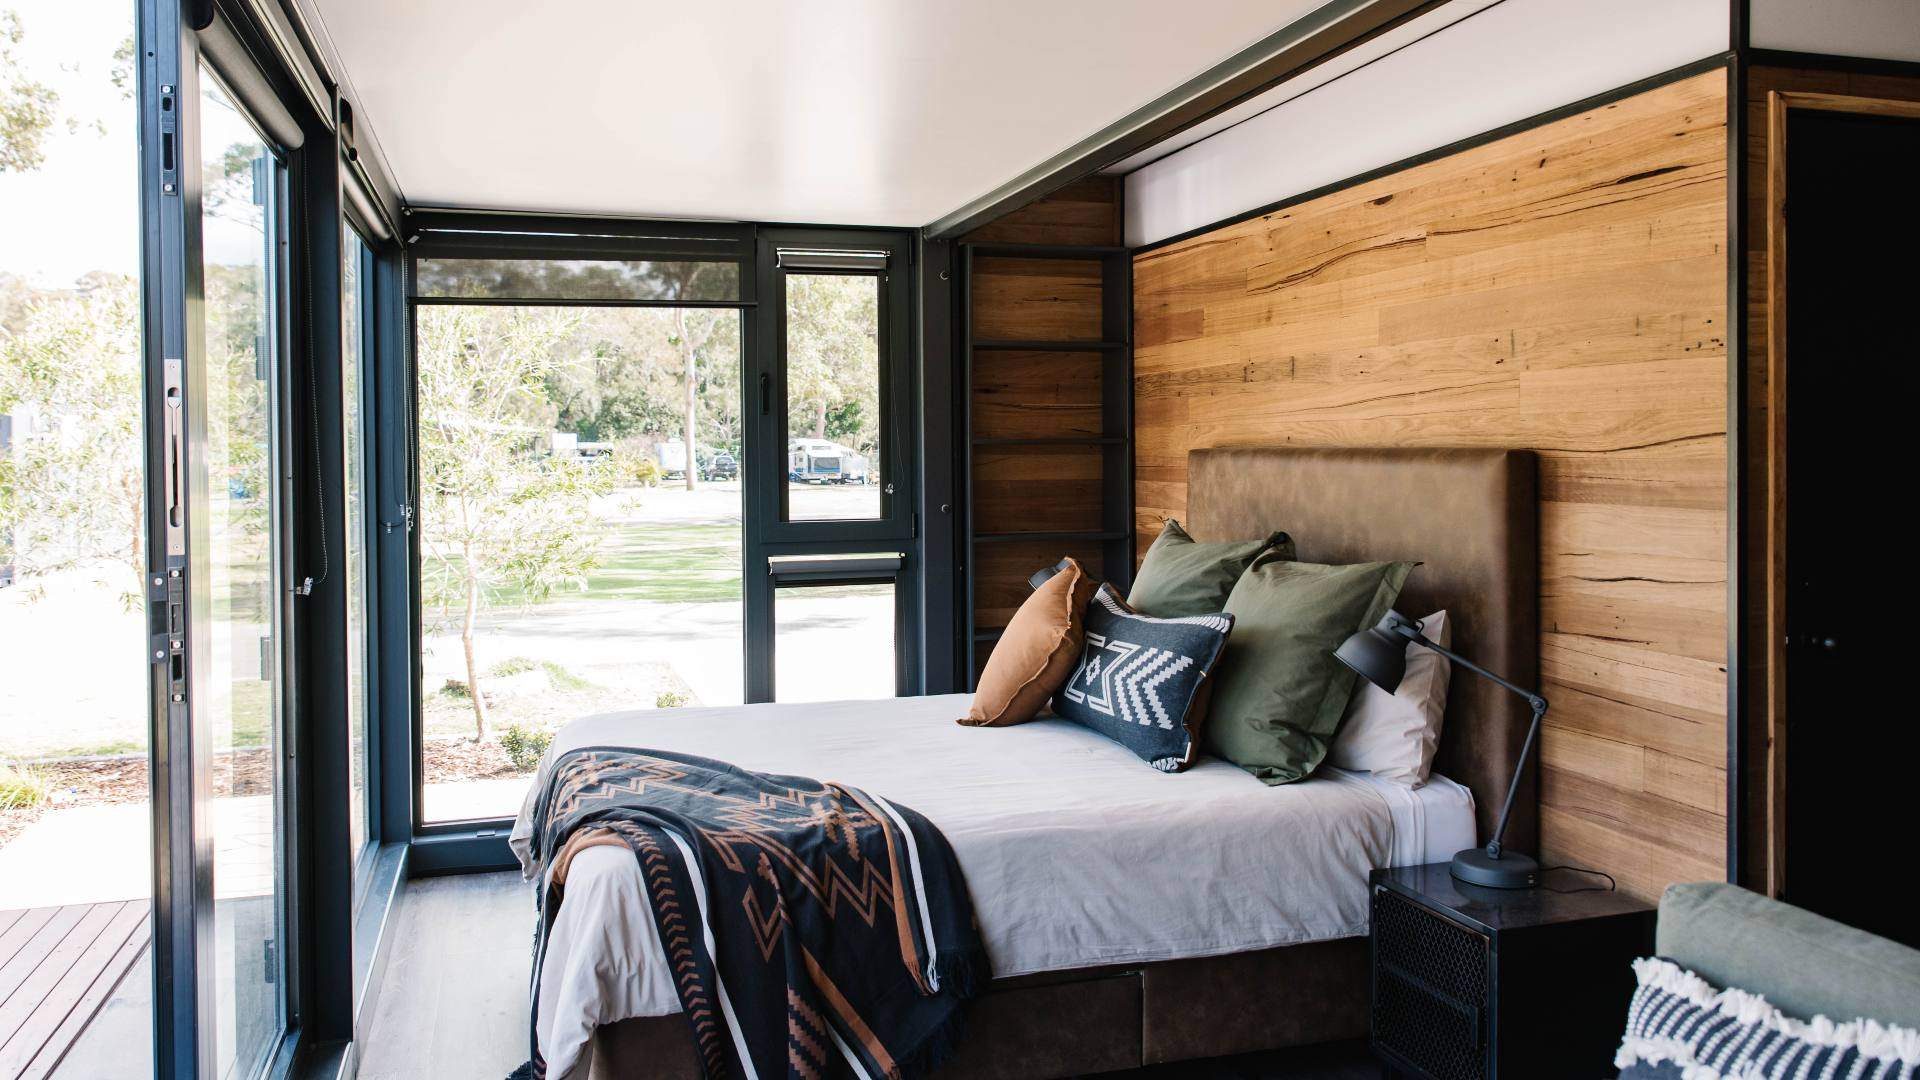 Jindabyne Is Set to Score Two Luxe Glamping-Style Shipping Containers Just in Time for Snow Season